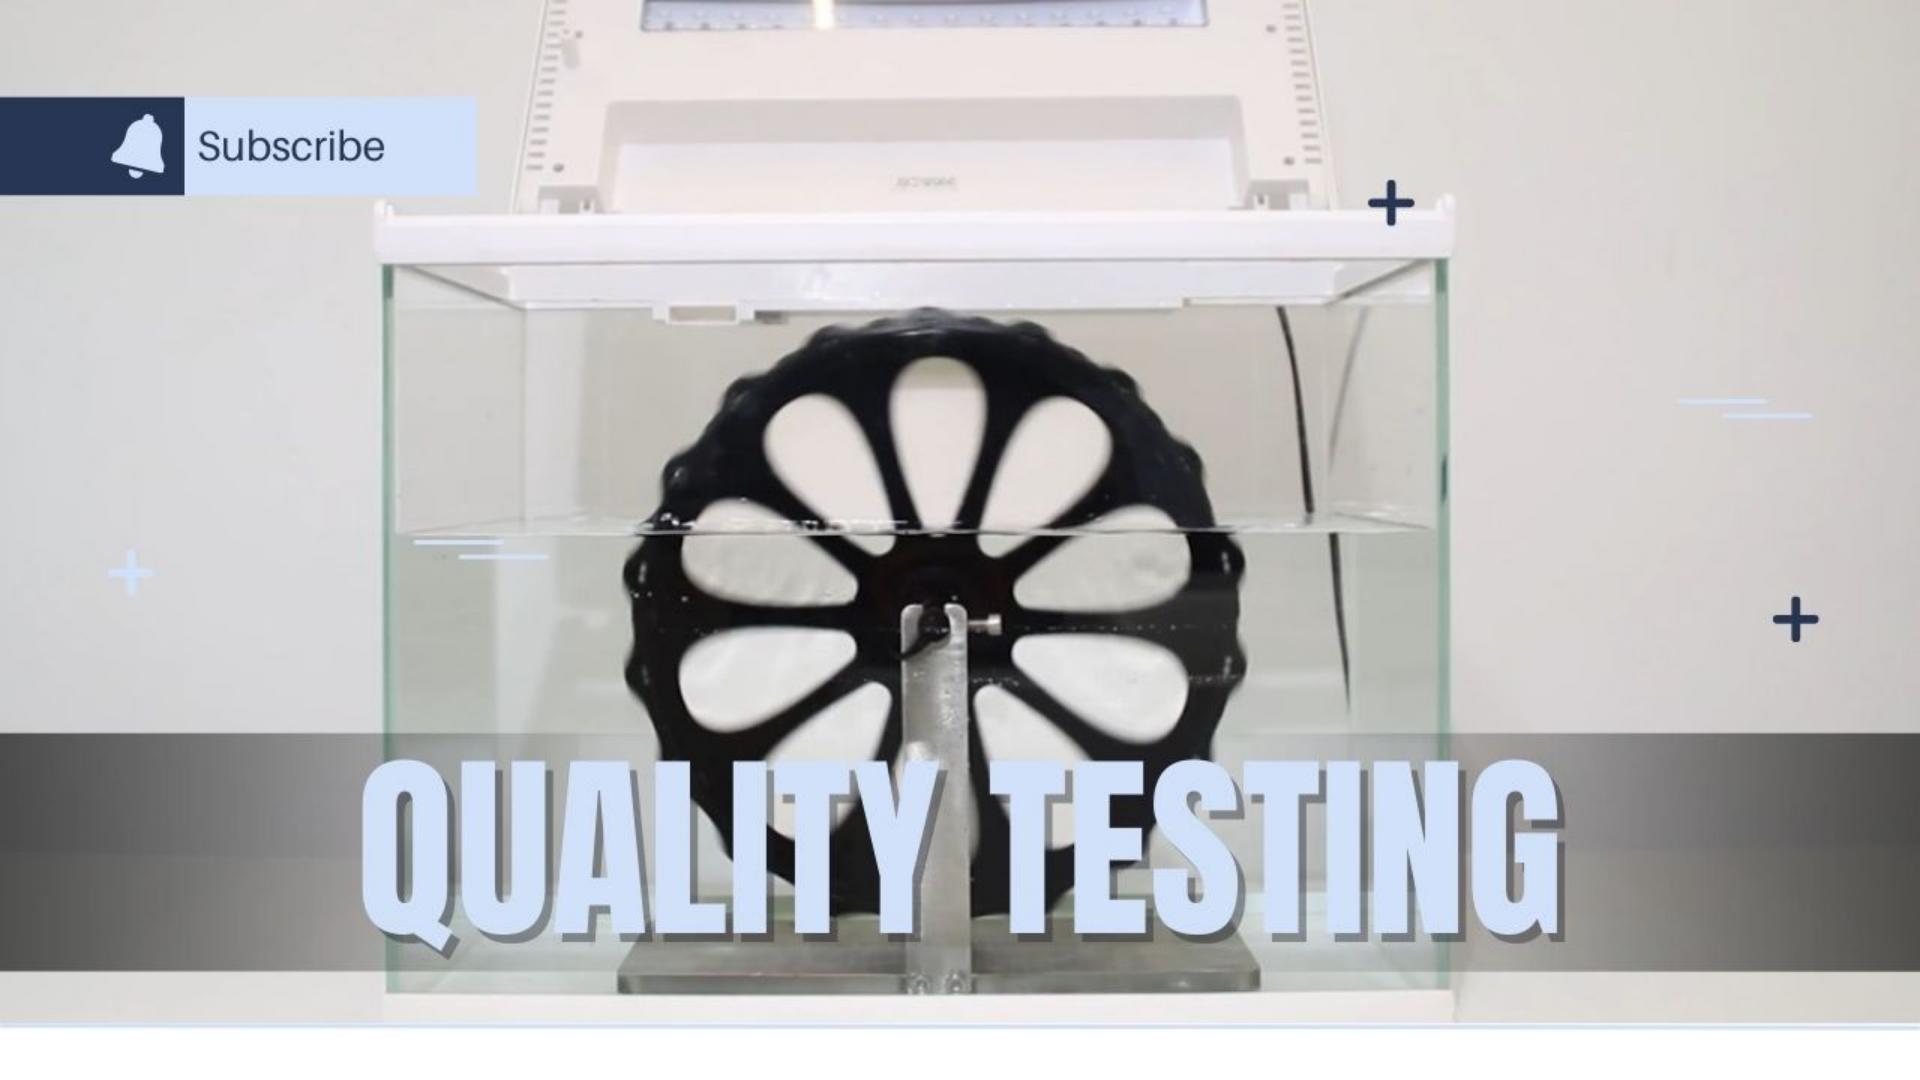 Behind the Scenes: Product Quality Testing Process Revealed